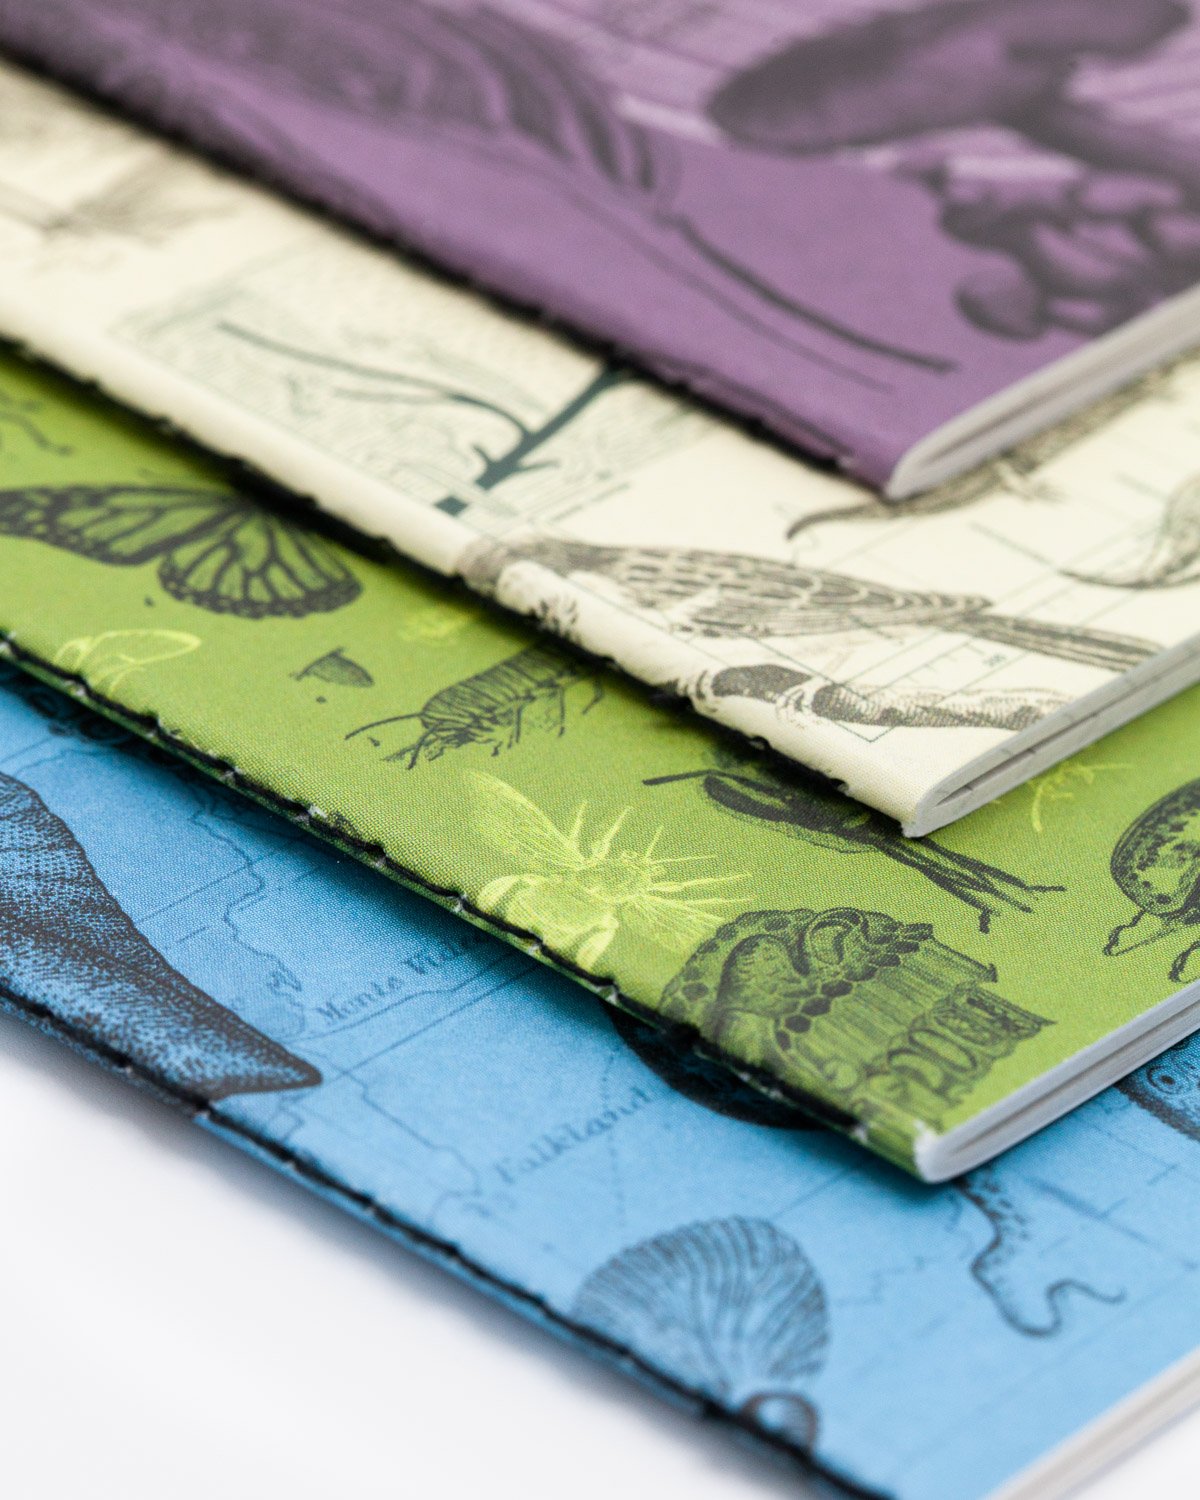 Corners of Natural Science mini softcovers by Cognitive Surplus